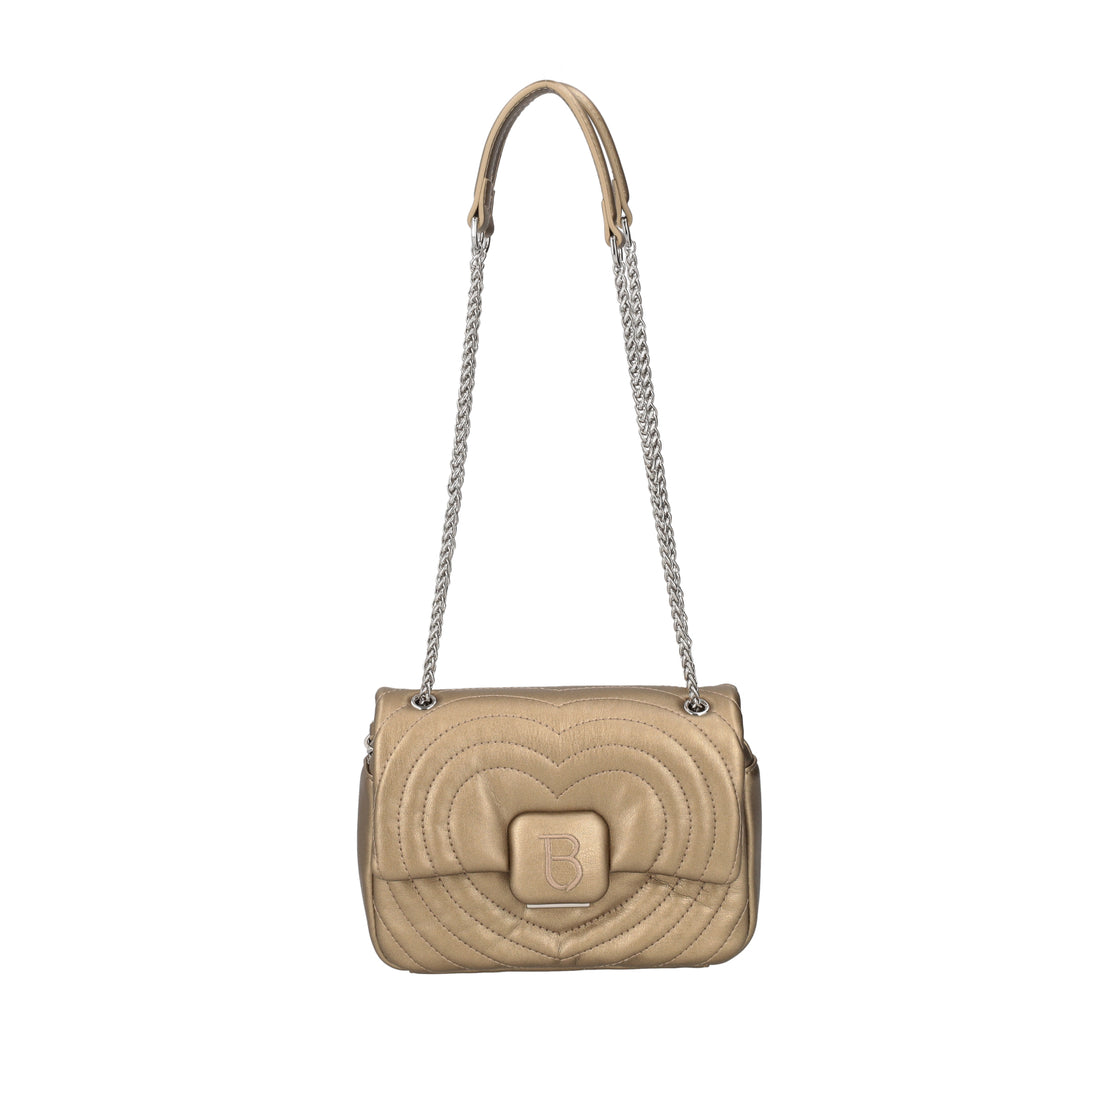 “SACHER” BAG IN BRONZE WITH FLAP CLOSURE